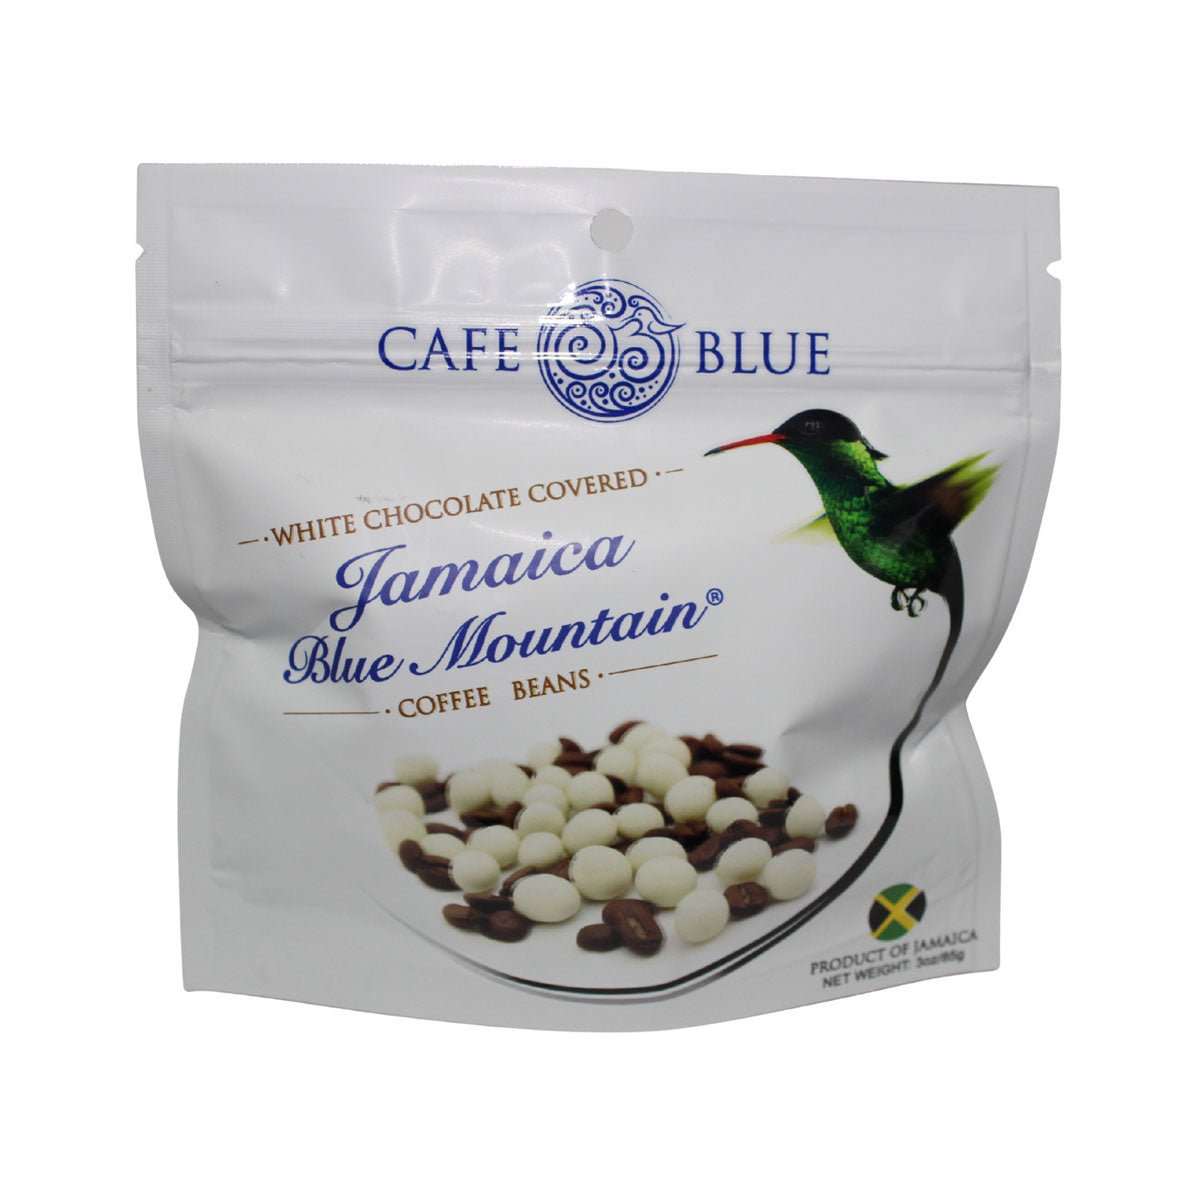 Cafe Blue White Chocolate Covered Coffee Beans, 3oz